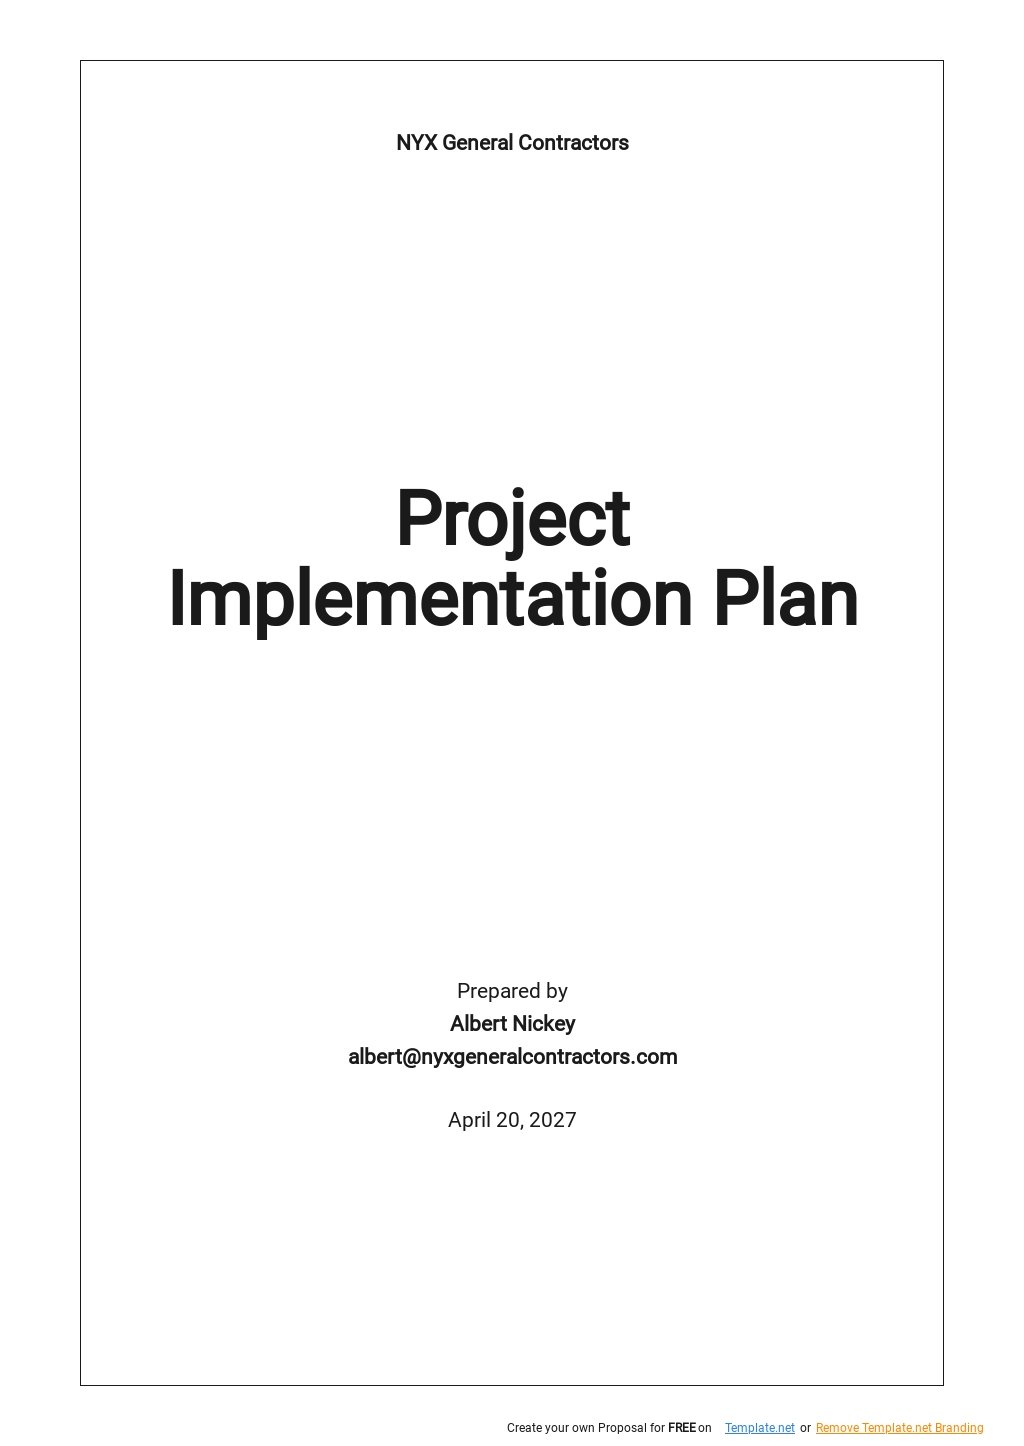 Implementation Plan Speed Up Project Planning With An Implementation